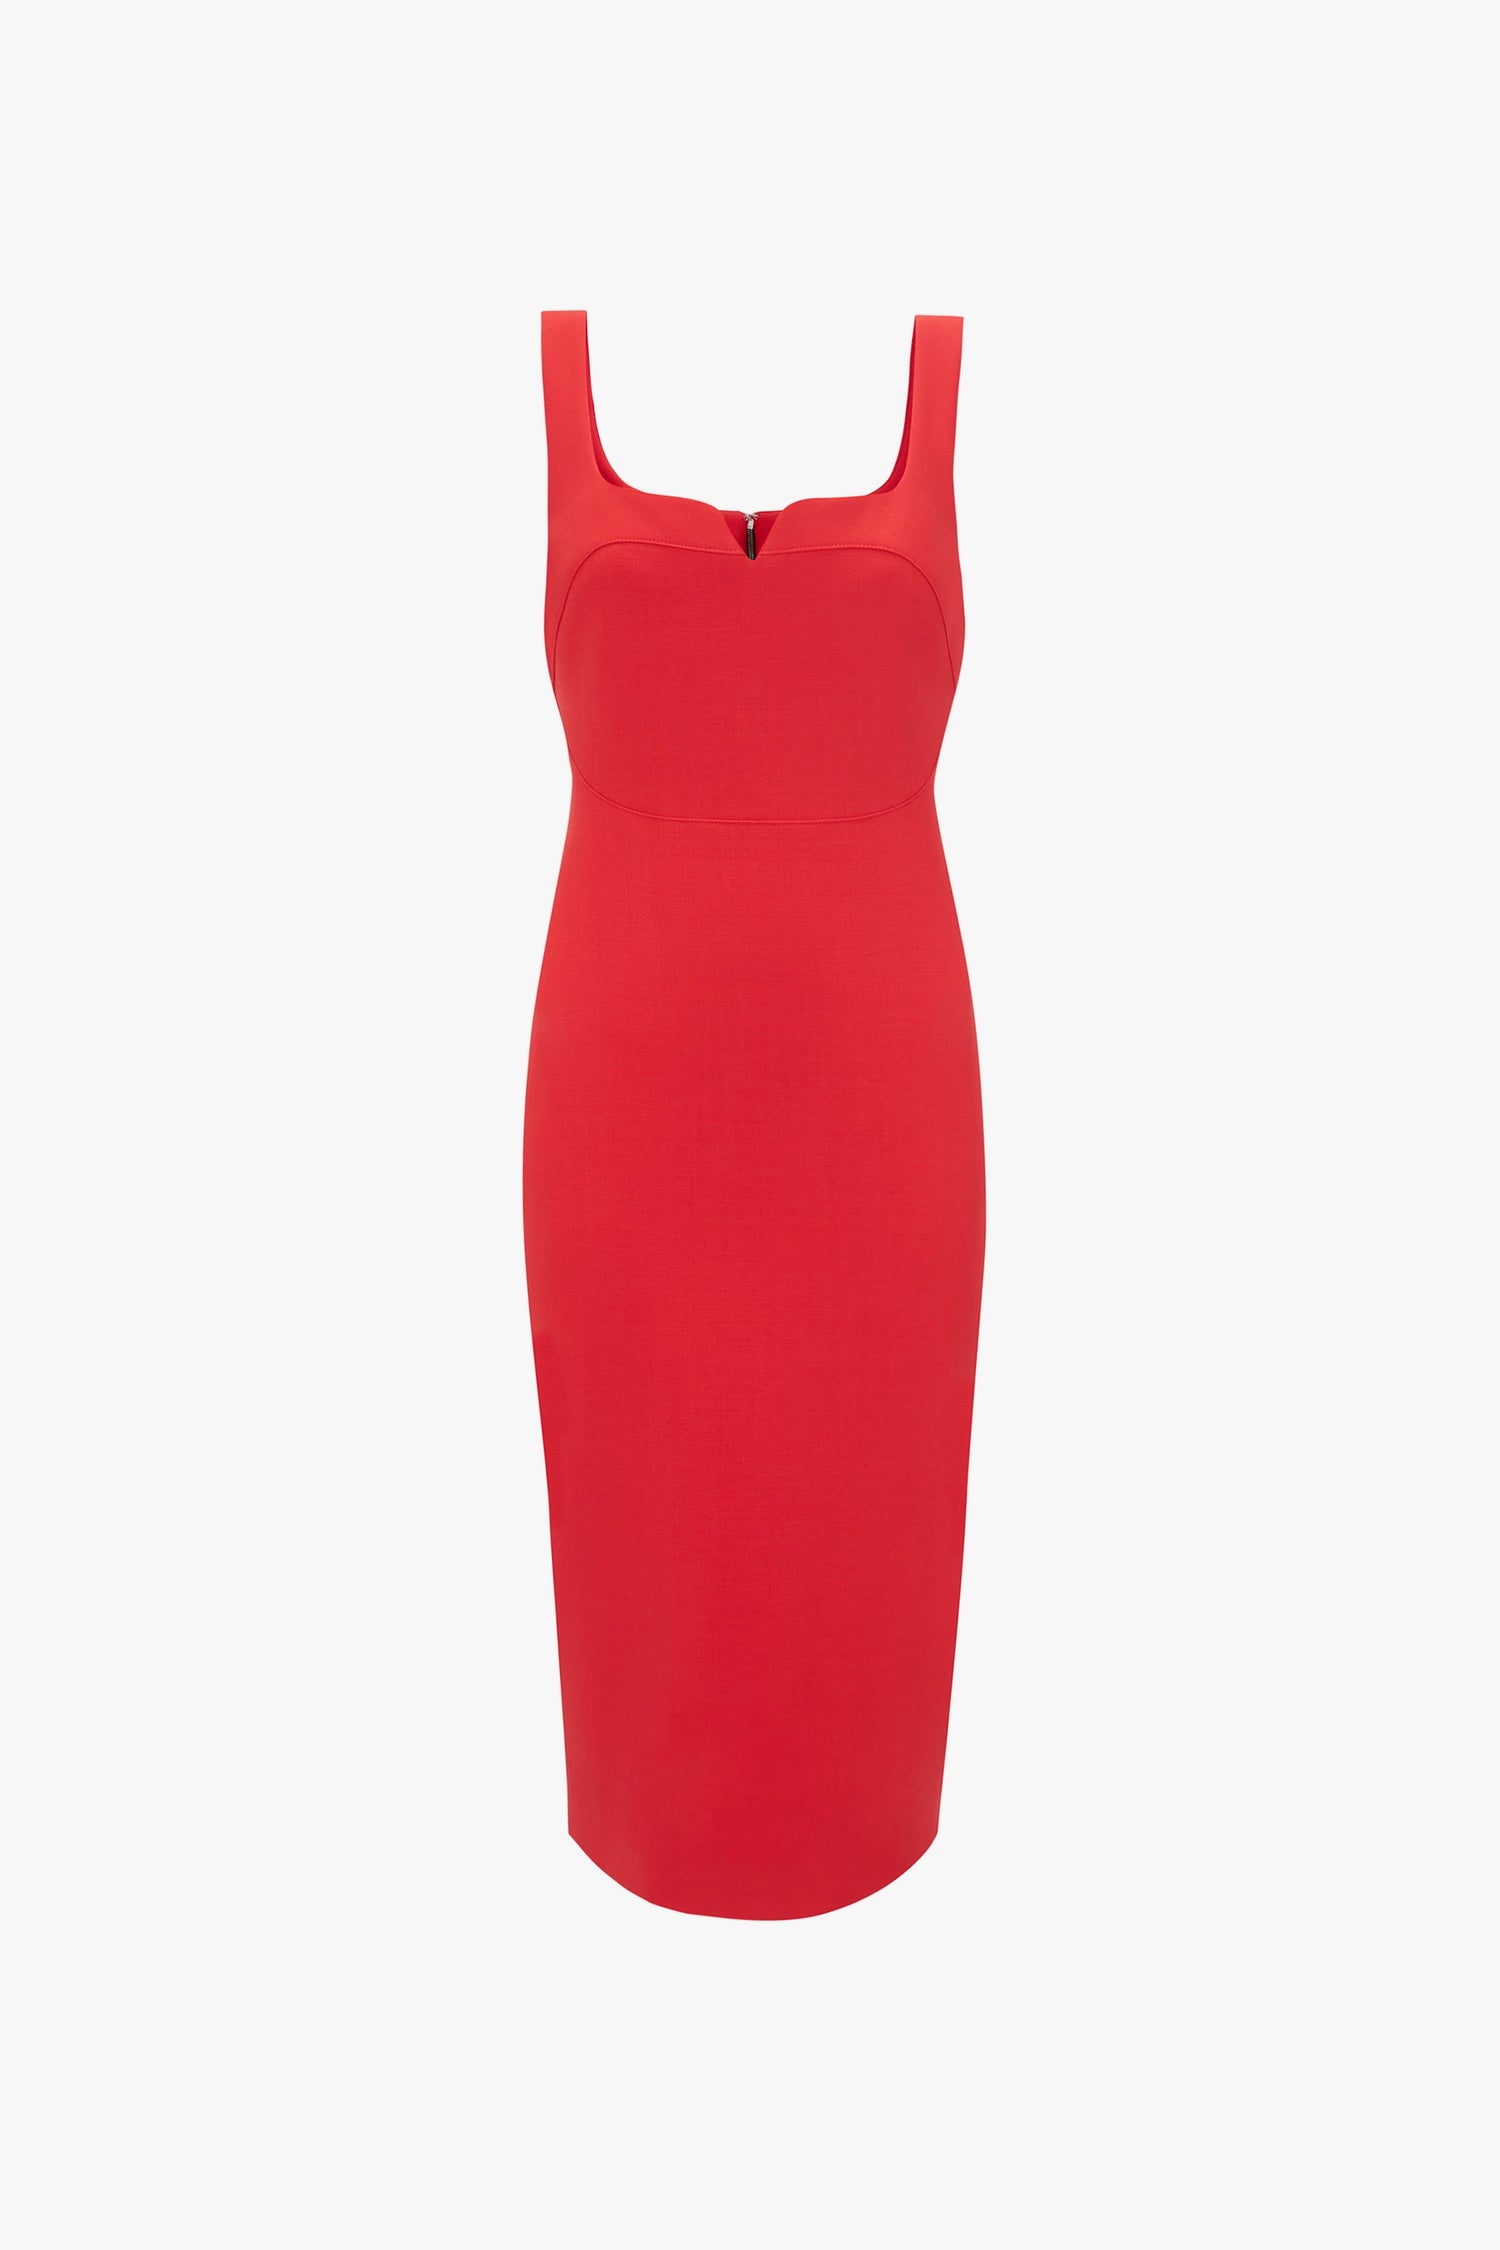 Sleeveless, form-fitting Sleeveless Fitted T-Shirt Dress In Bright Red by Victoria Beckham with a sweetheart neckline, front zipper, and knee-length hem.